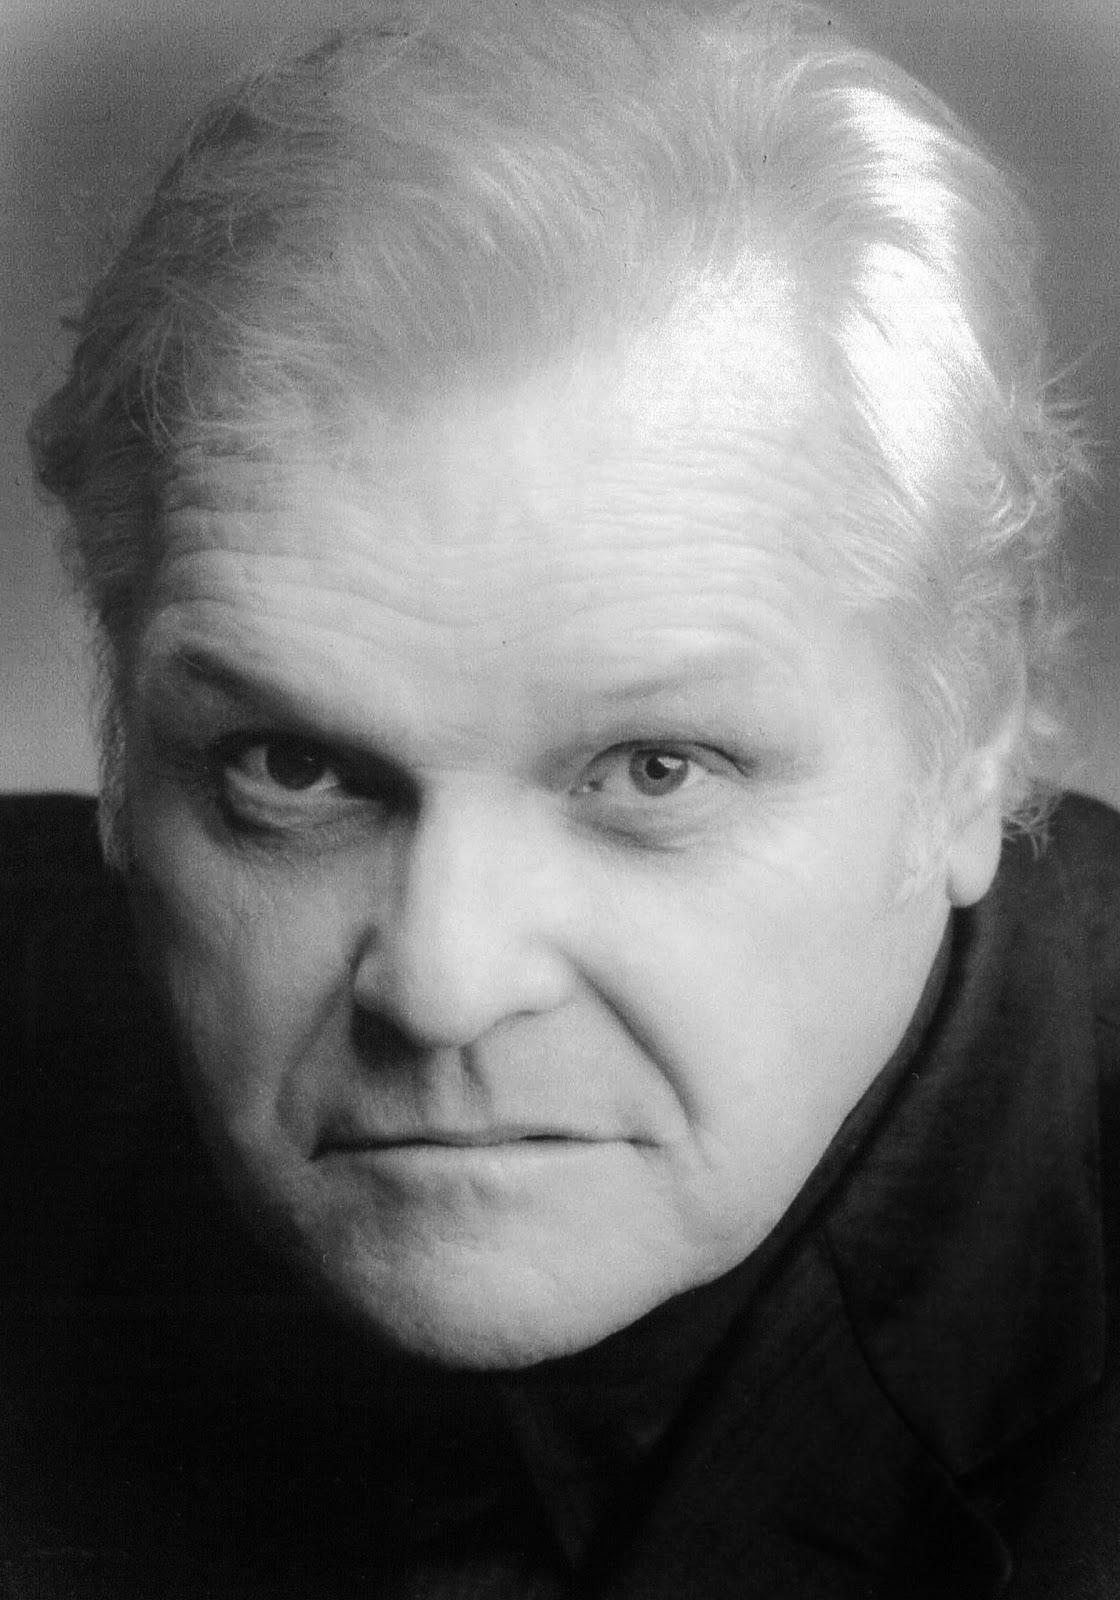 ... brian dennehy will | brian dennehy images wallpapers | imagesbee.com